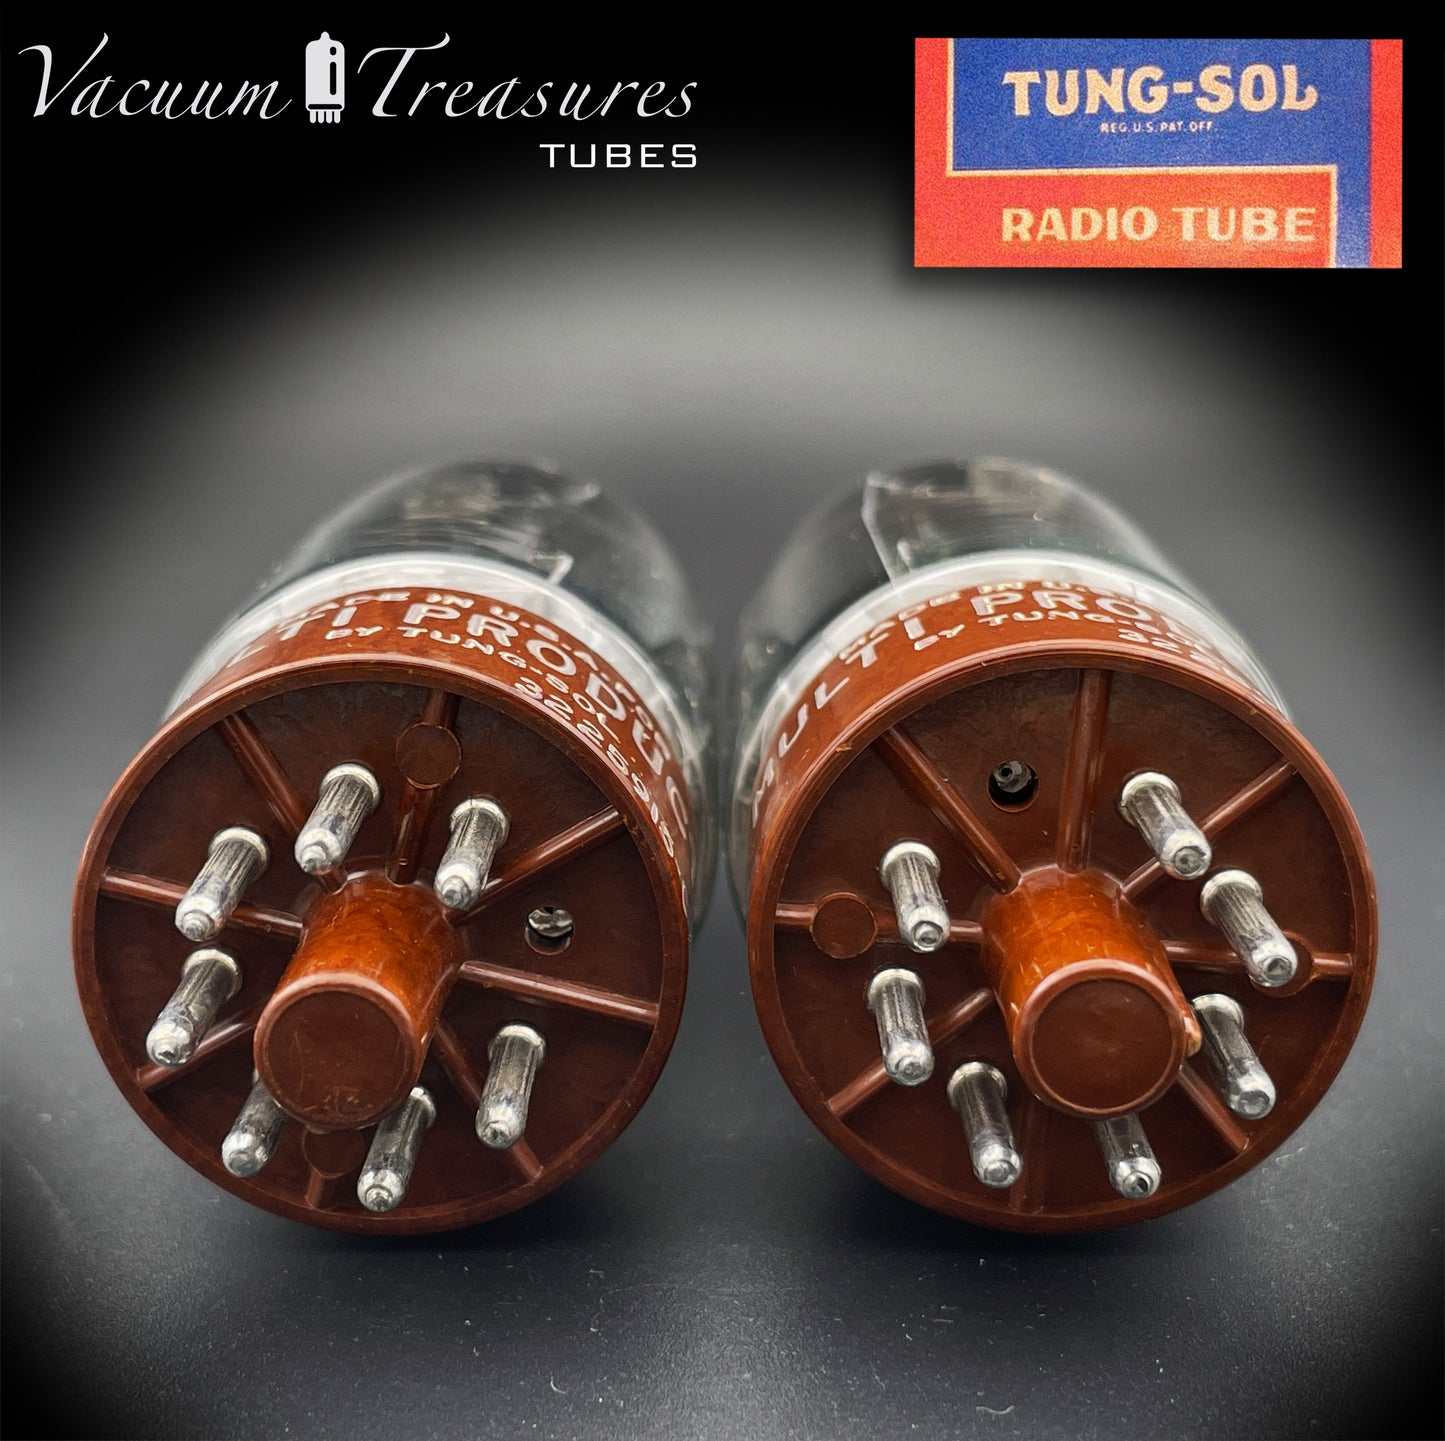 5881 ( 6L6WGB ) TUNG-SOL NOS Brown Base Matched Pair Vacuum Tubes Made in USA